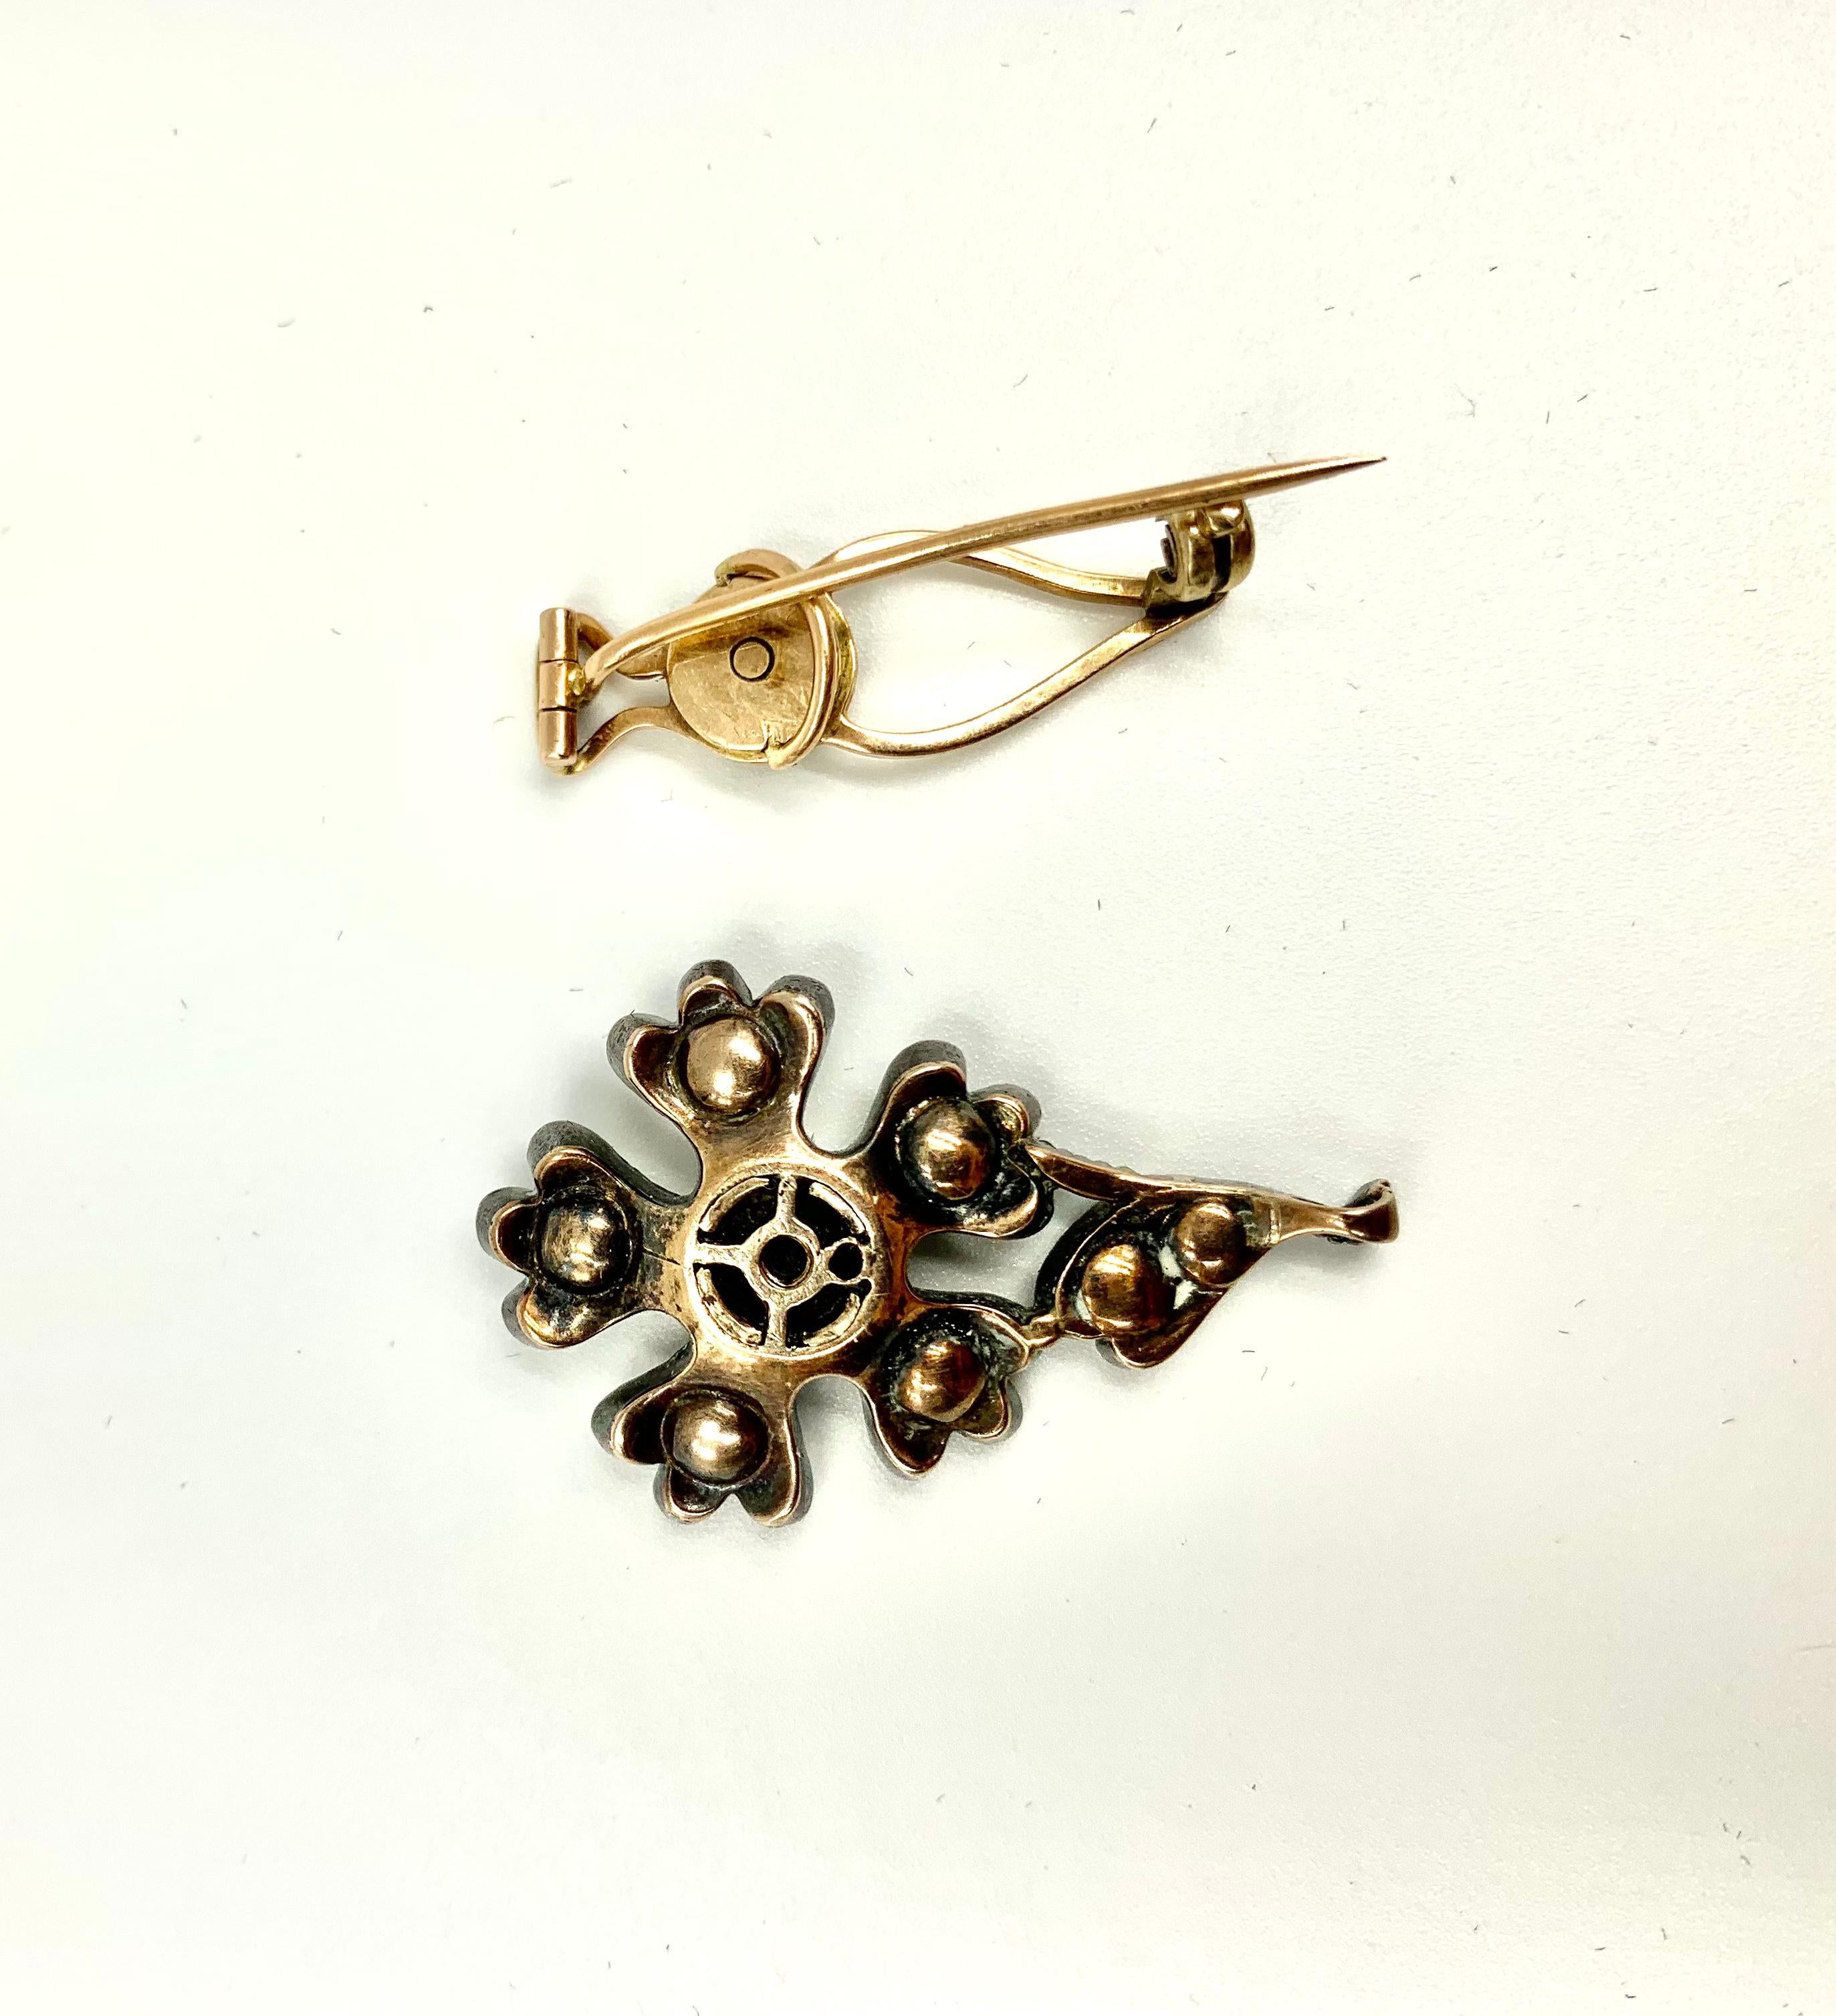 Rare 18th Century Georgian Diamond Gold, Silver Scarlet Pimpernel Pendant Brooch In Good Condition For Sale In New York, NY